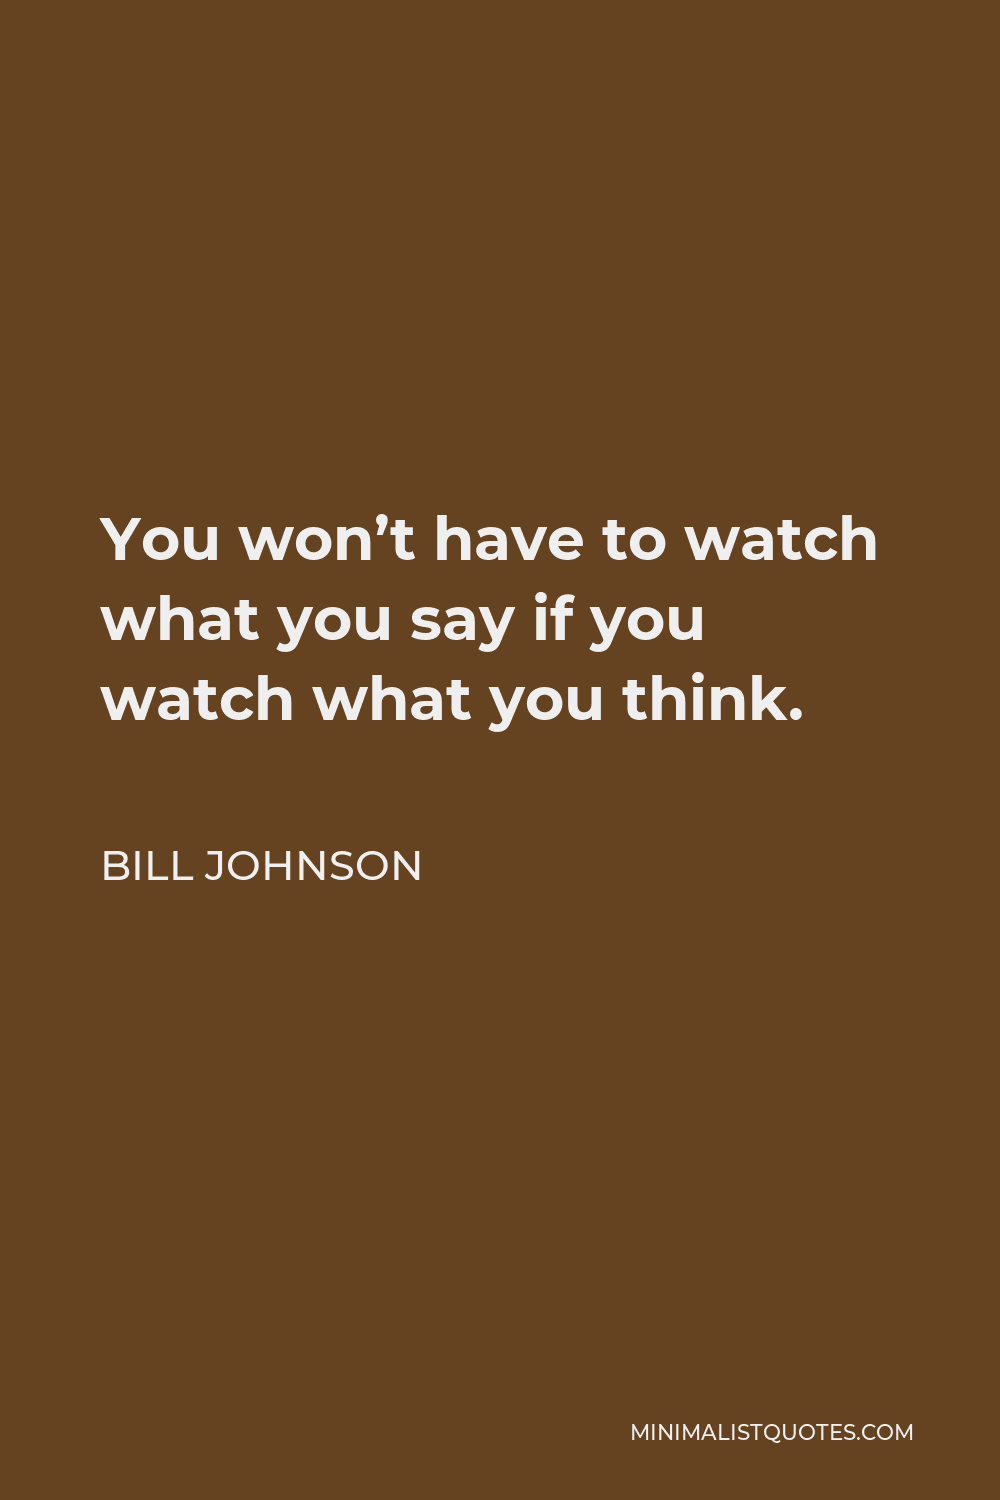 Bill Johnson Quote - You won’t have to watch what you say if you watch what you think.